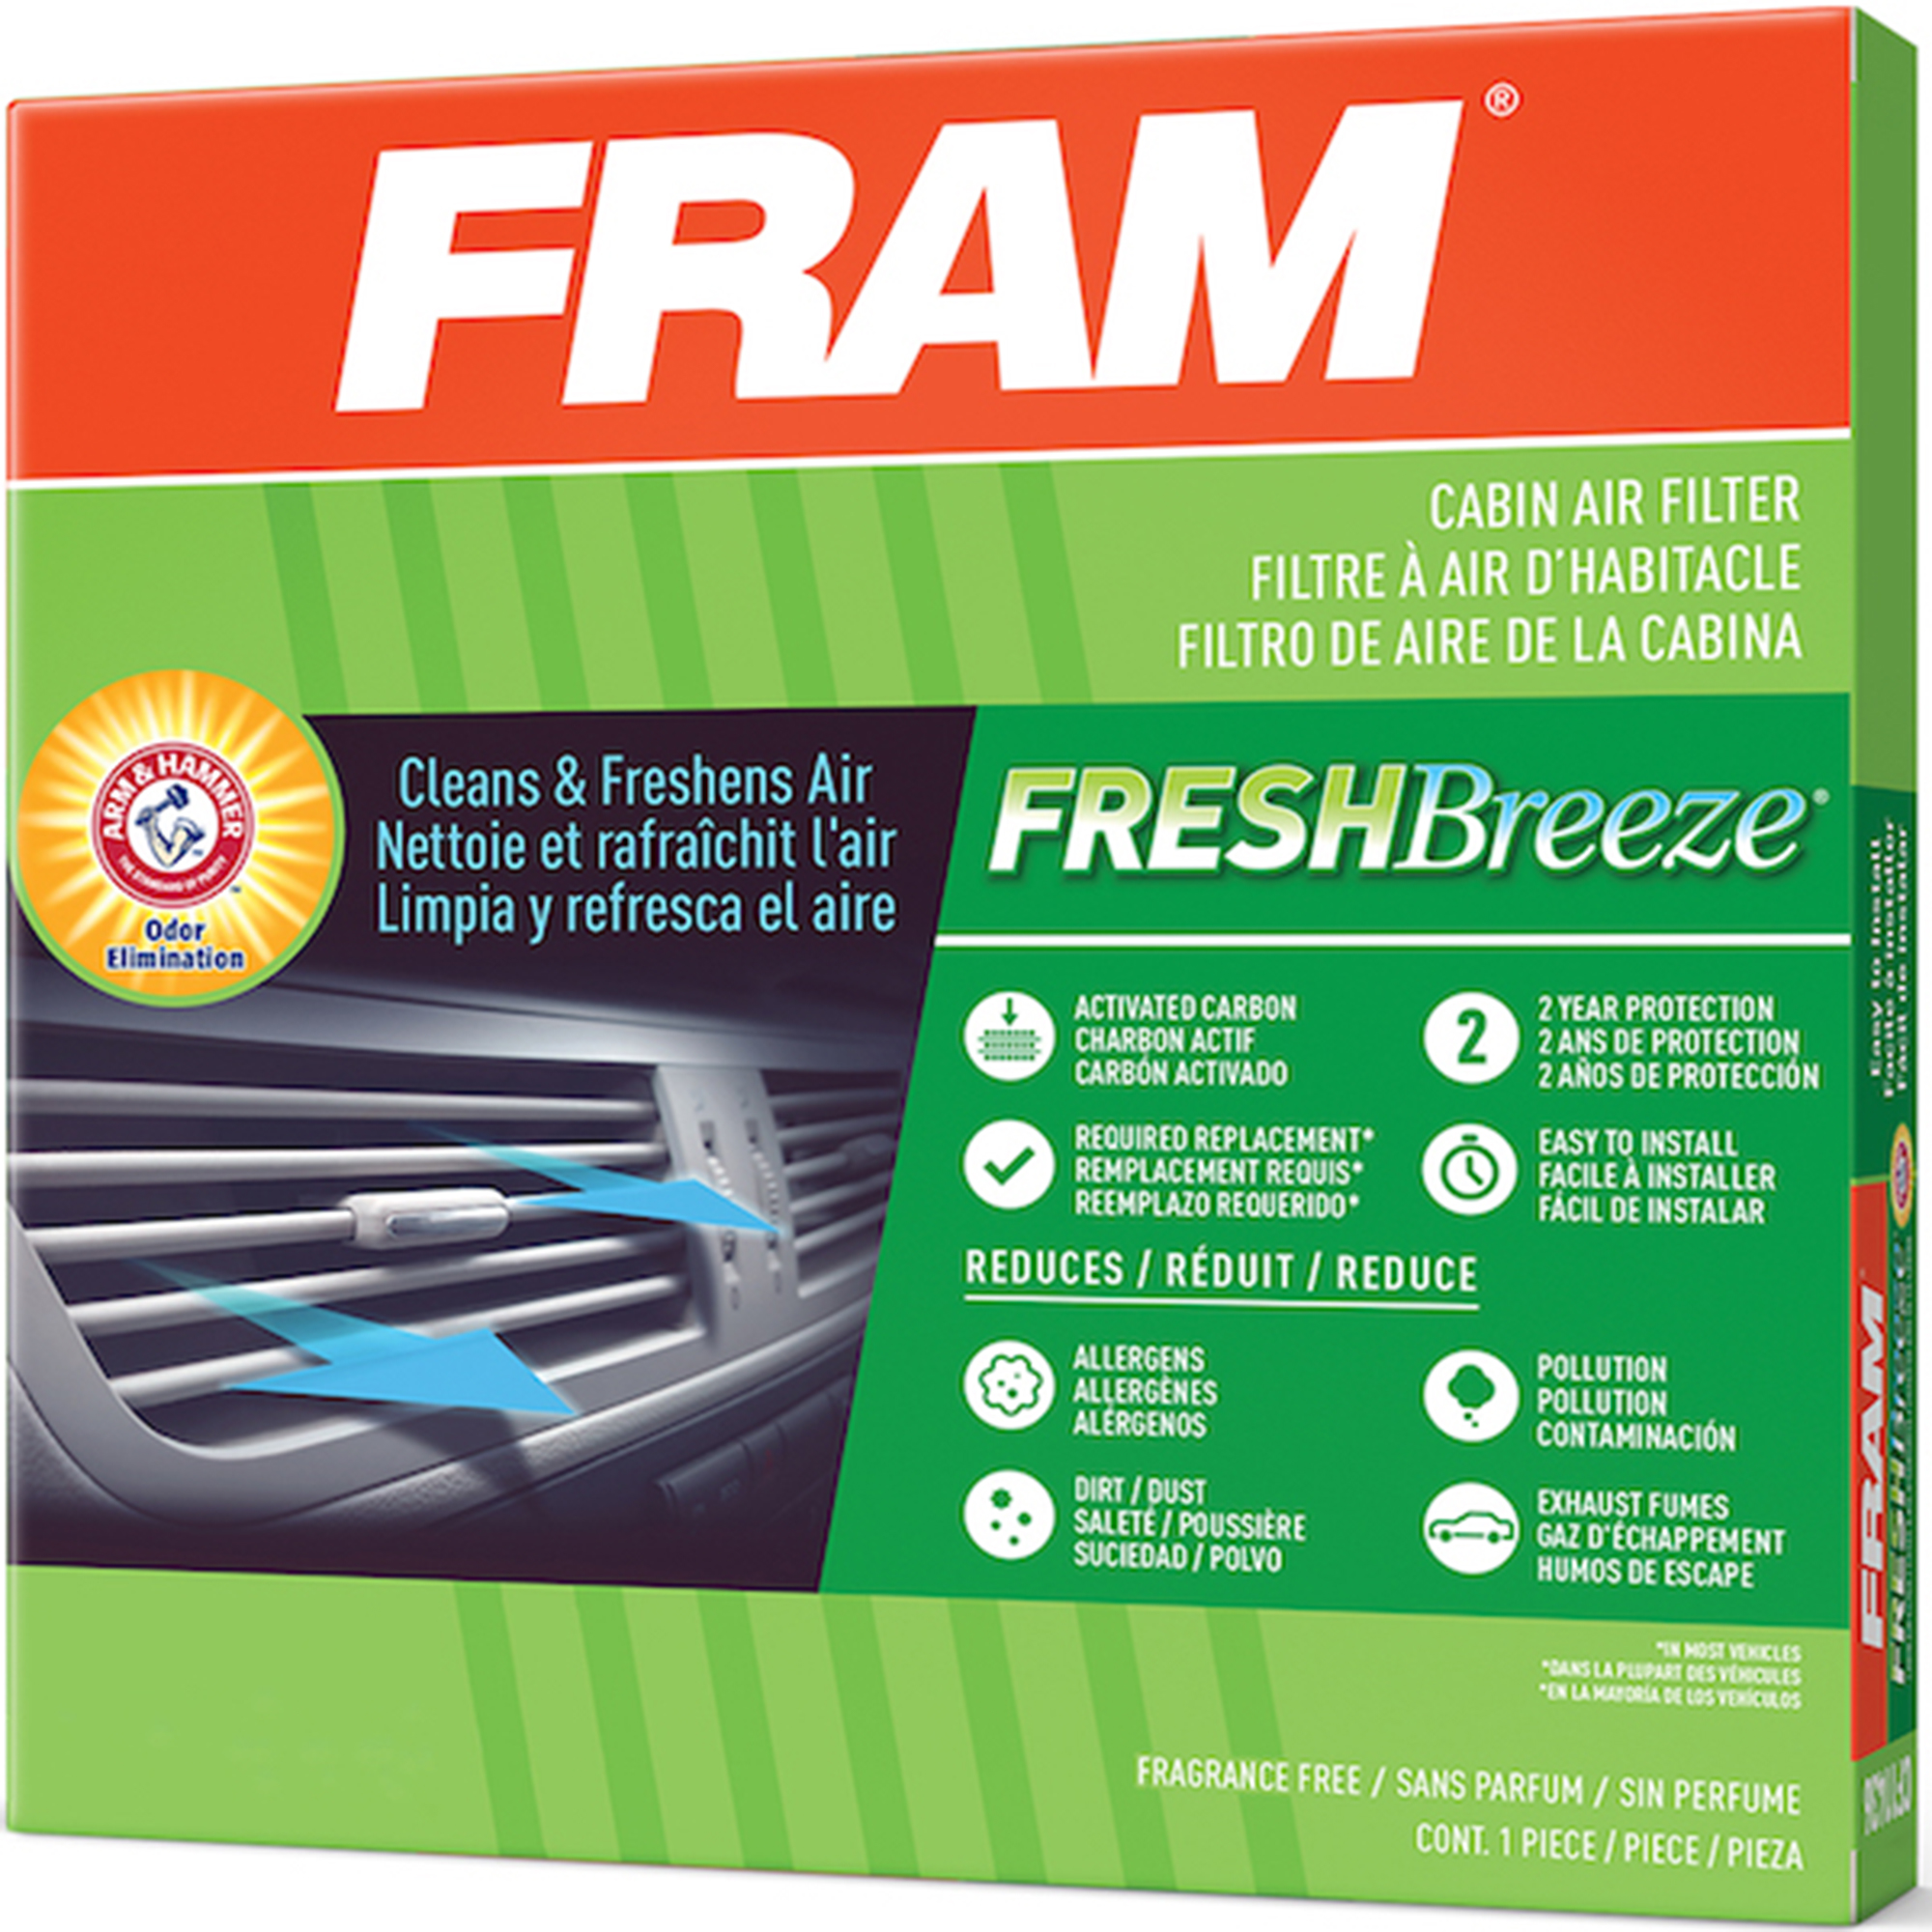 FRAM CF10828, Fresh Breeze Cabin Air Filter with Arm & Hammer Baking Soda, for Select Mercedes-Benz Vehicles Fits select: 2006-2013 MERCEDES-BENZ ML, 2007-2013 MERCEDES-BENZ GL - image 5 of 9